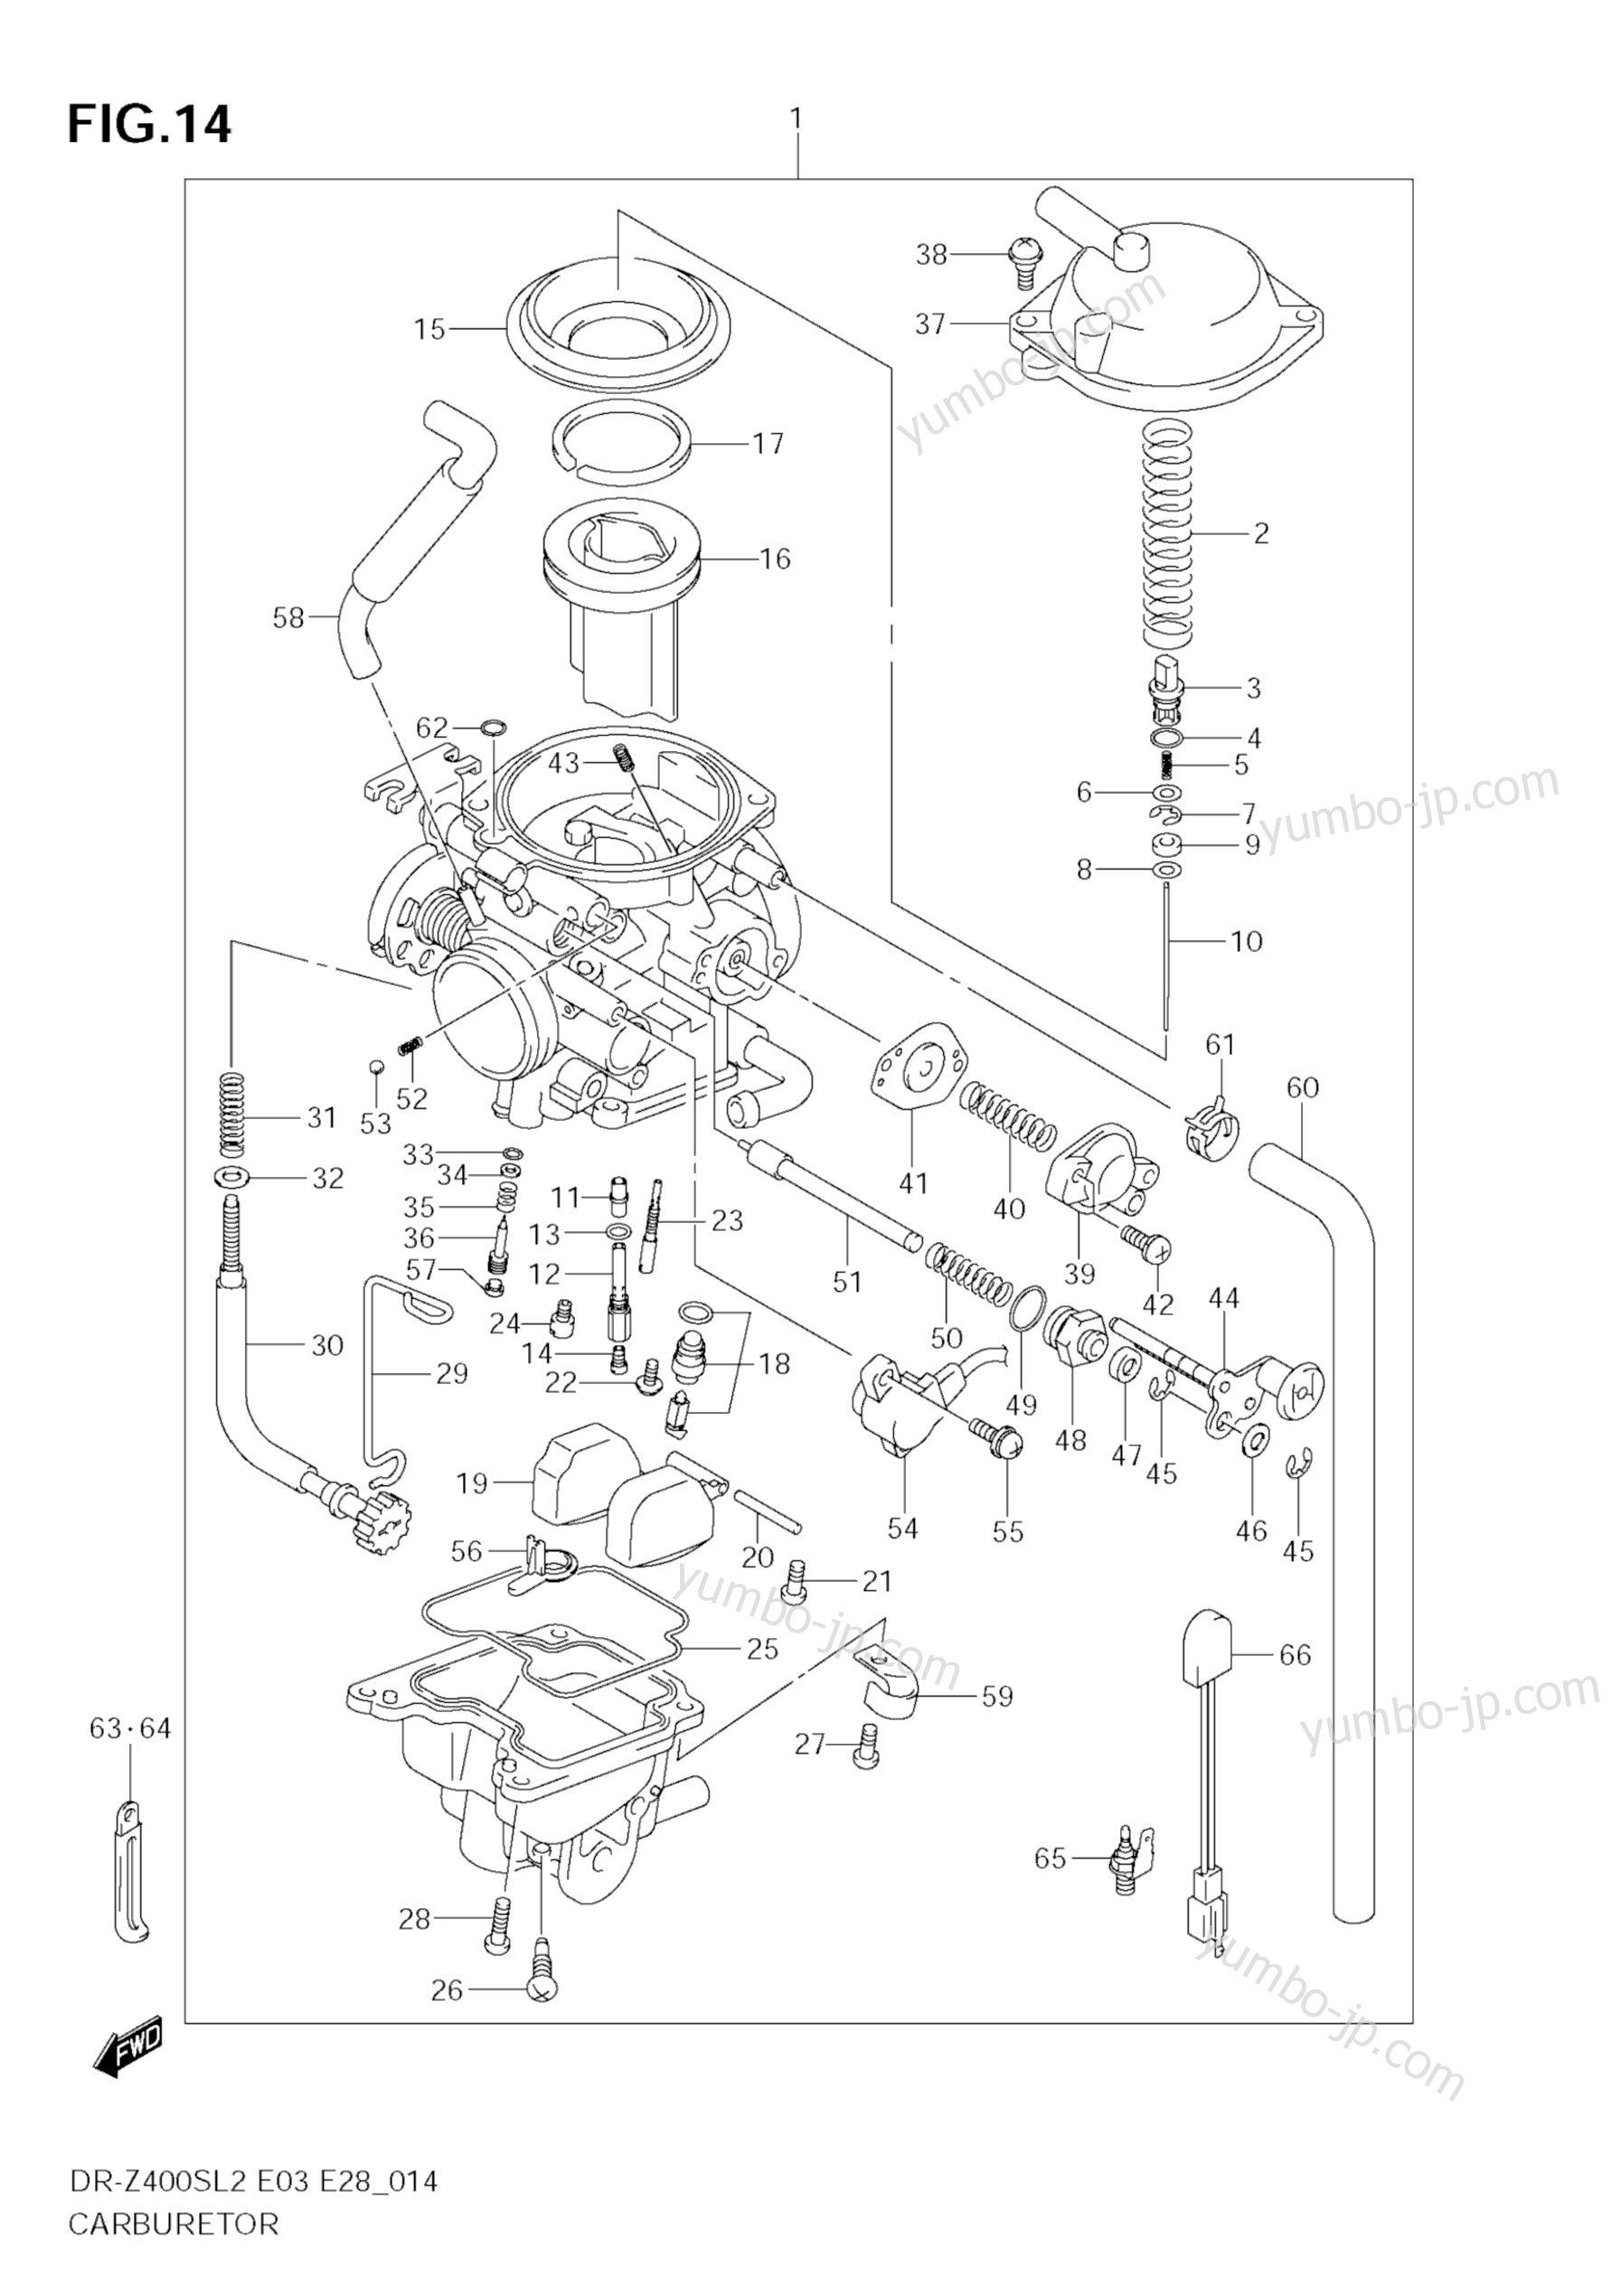 CARBURETOR (E33) for motorcycles SUZUKI DR-Z400S 2012 year